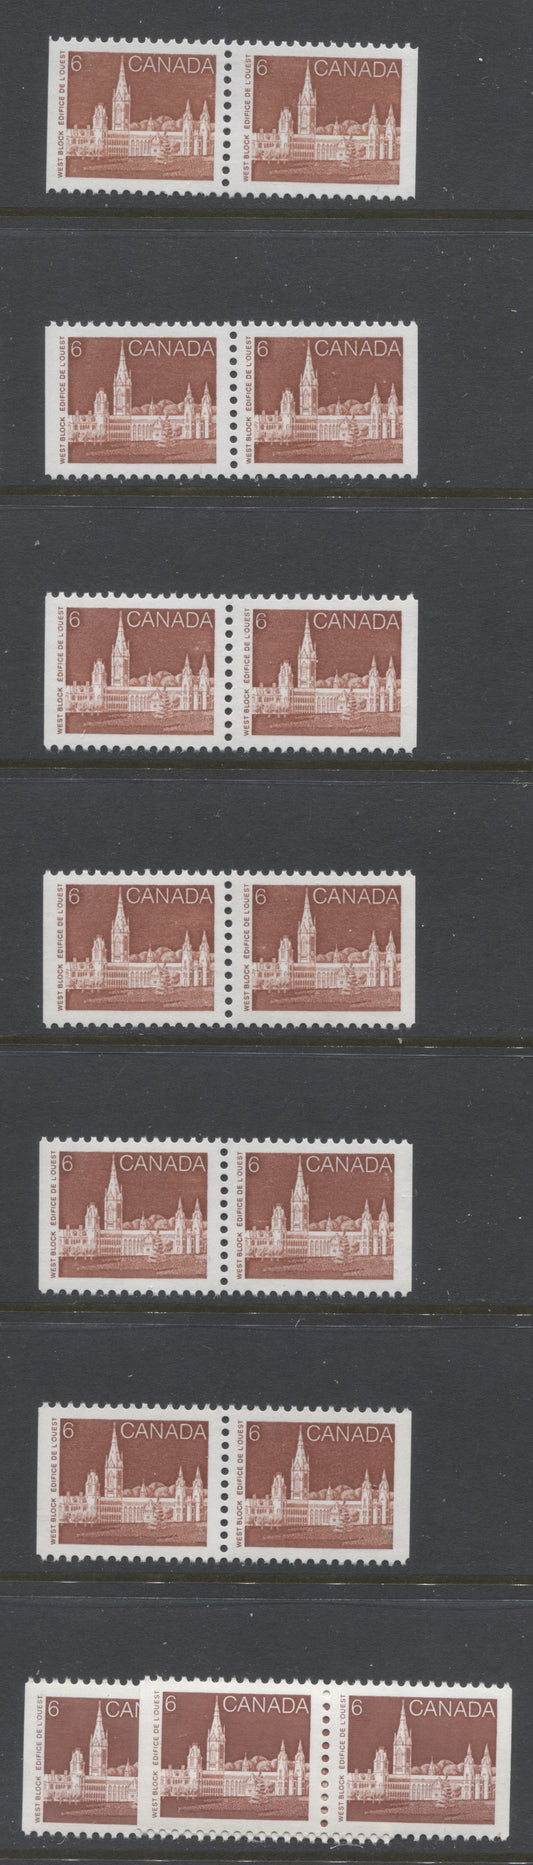 Lot 385 Canada #942-942v 6c Henna Brown Parliament Buildings, 1982-1987 Artifacts & National Parks Issue, 8 VFNH Booklet Pairs, NF/NF to HF/HF, Rolland & Harrison Papers